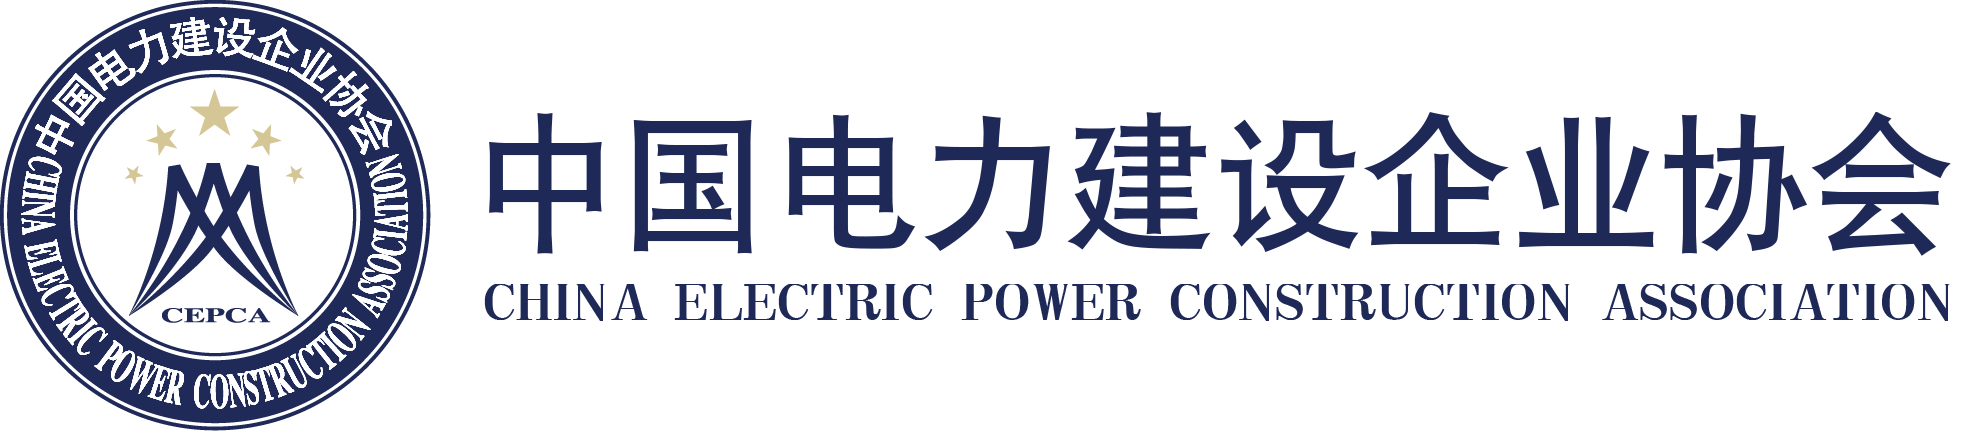 China Electric Power Construction Association